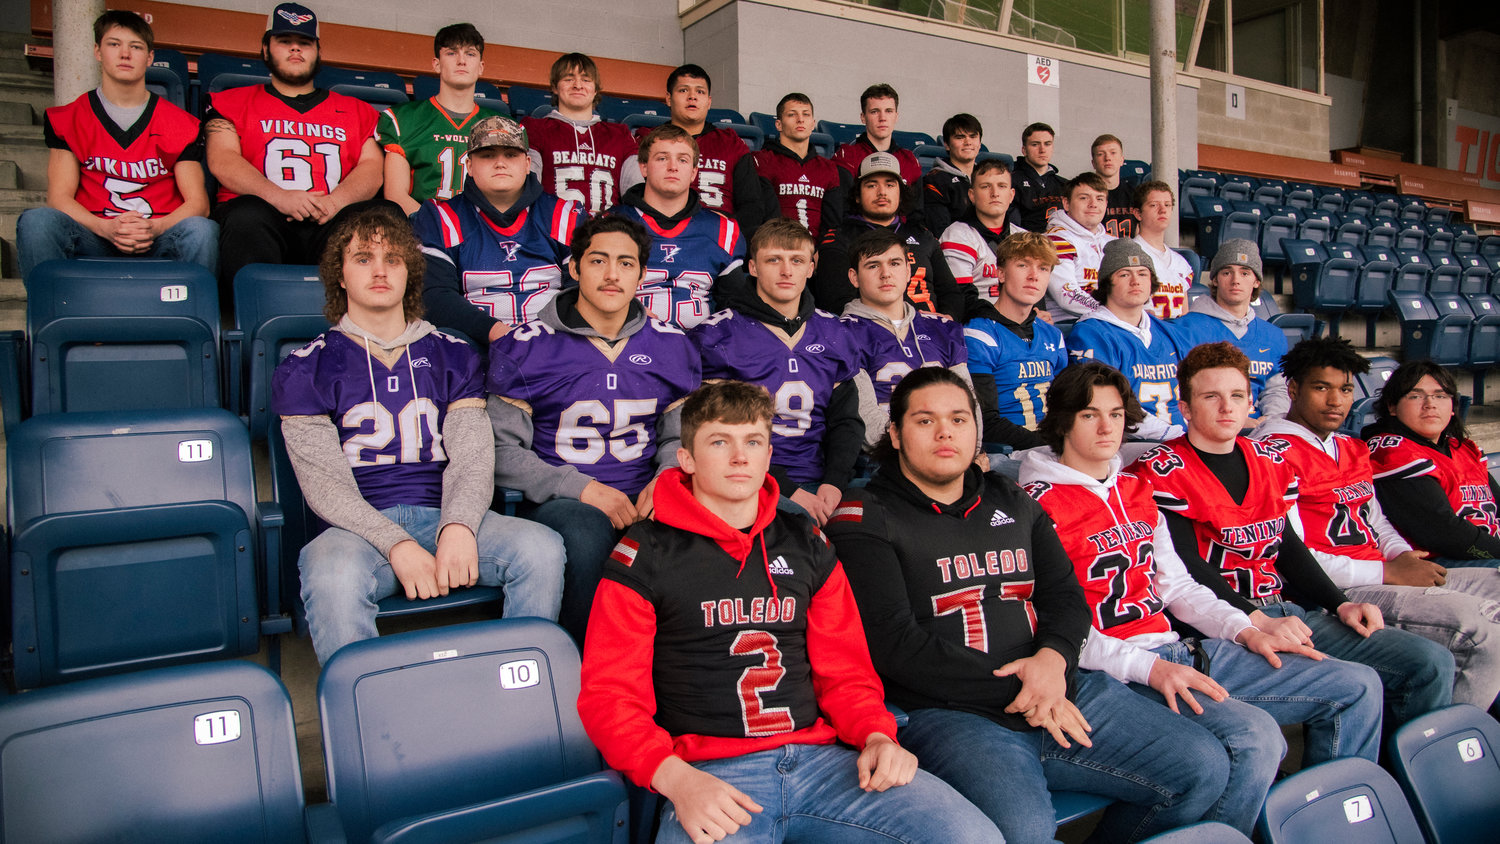 Athletes selected for the All-Area Football team pose for a photo at Tiger Stadium in Centralia sporting their school’s football jerseys.